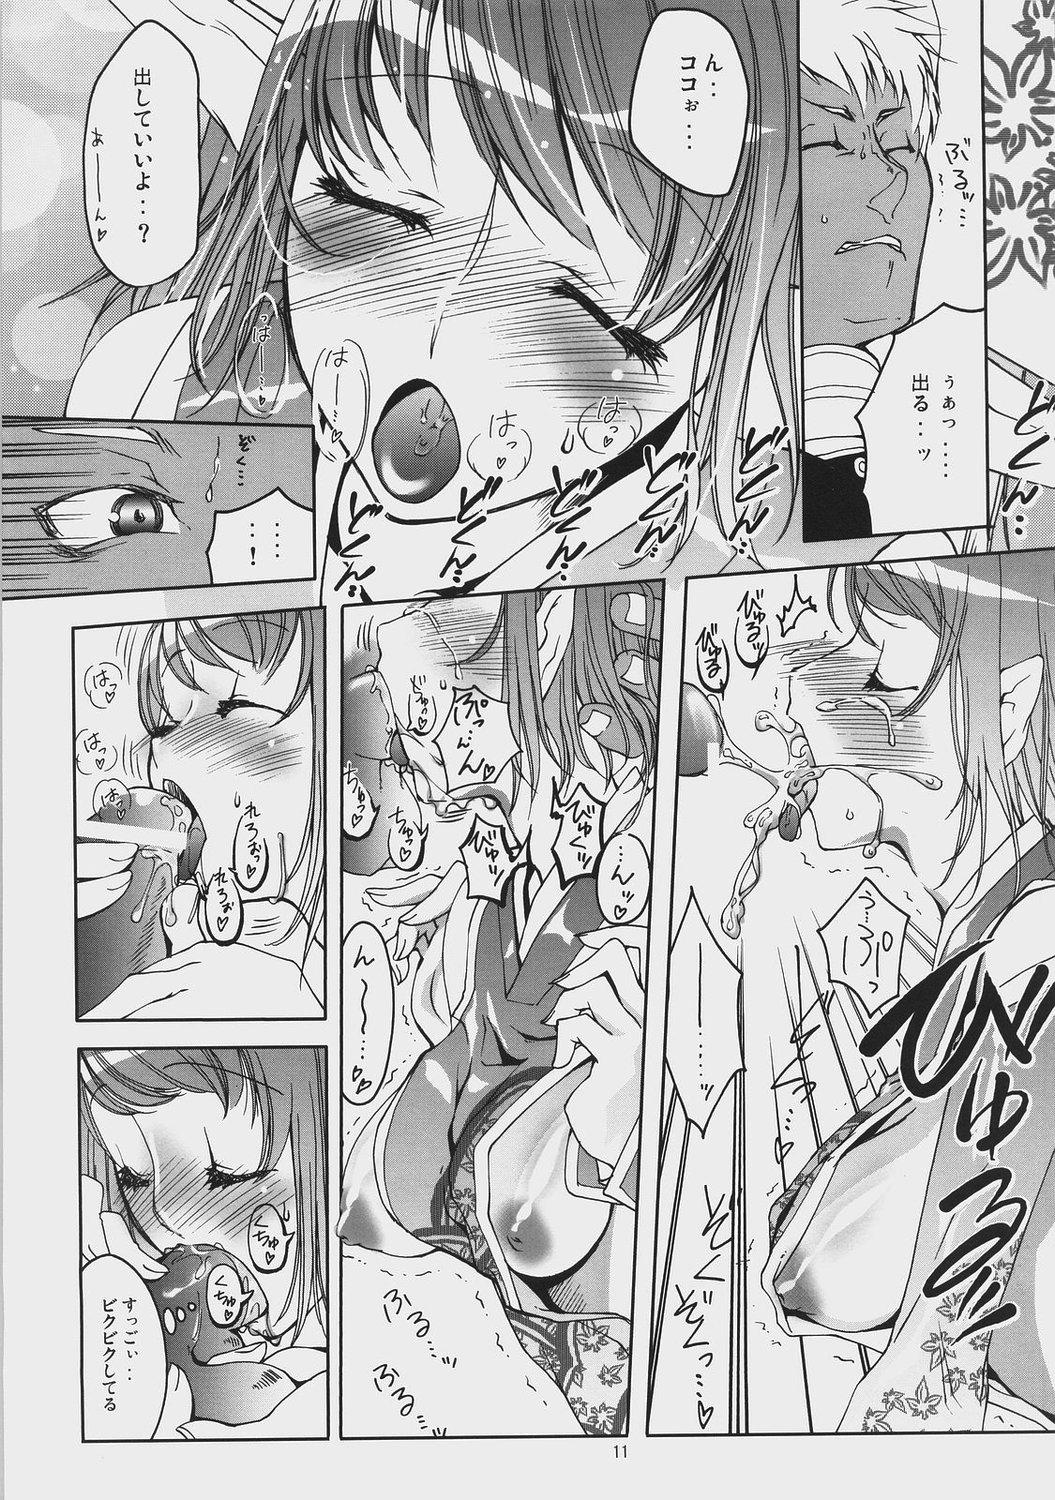 Butt Beauty and the Beast - Phantasy star universe Best Blowjob - Page 10